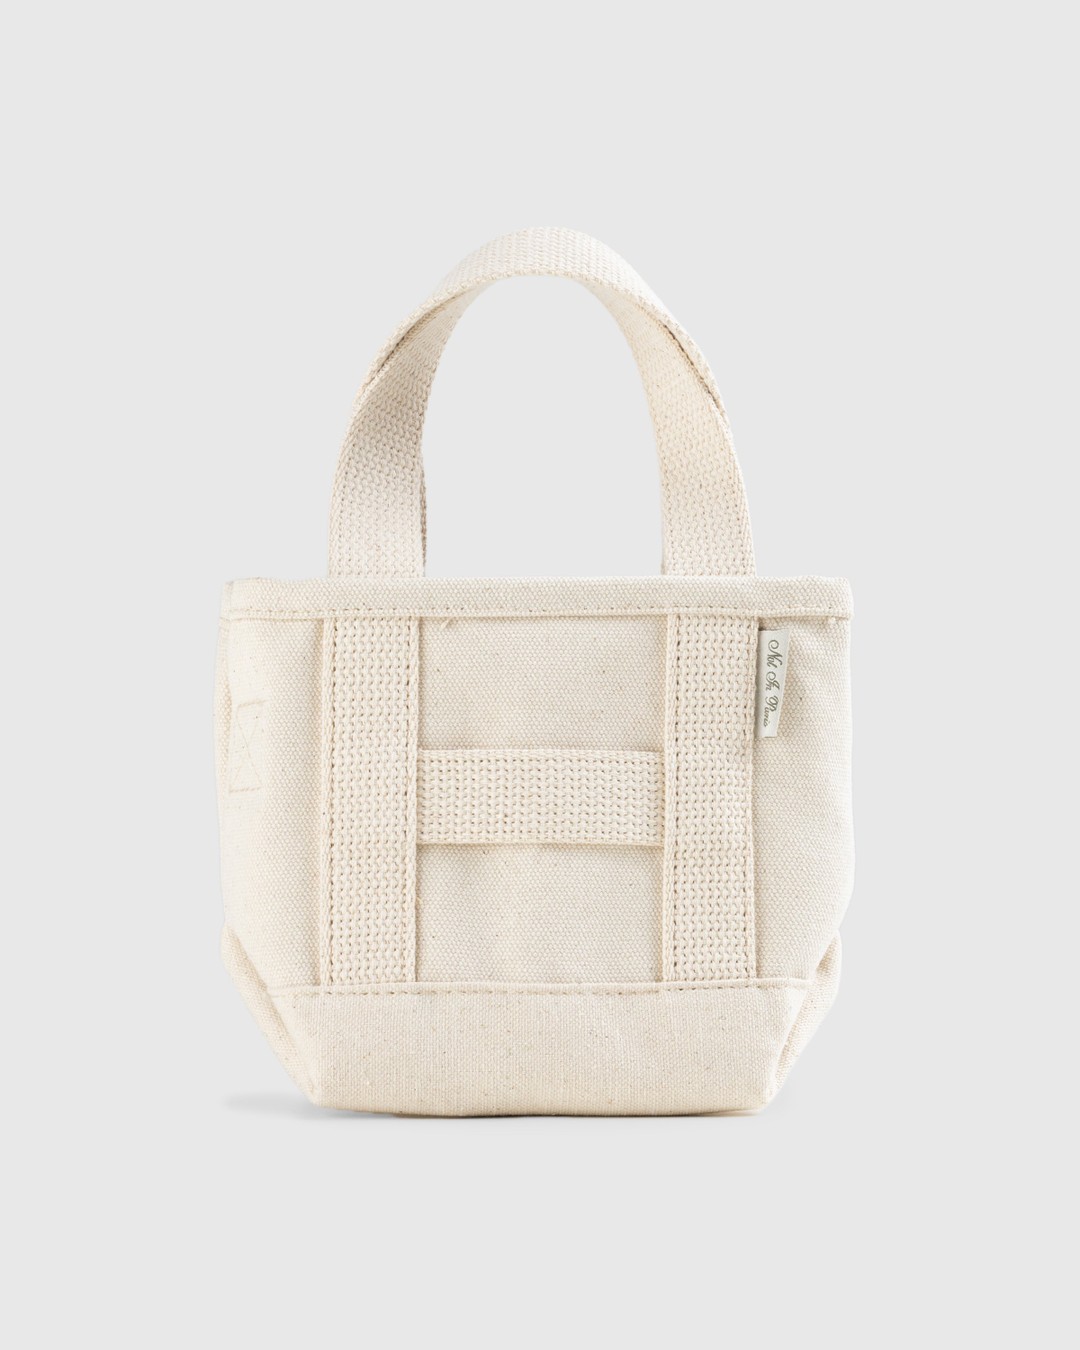 Highsnobiety – Not in Paris 5 Mini Canvas Tote Bag - One Size